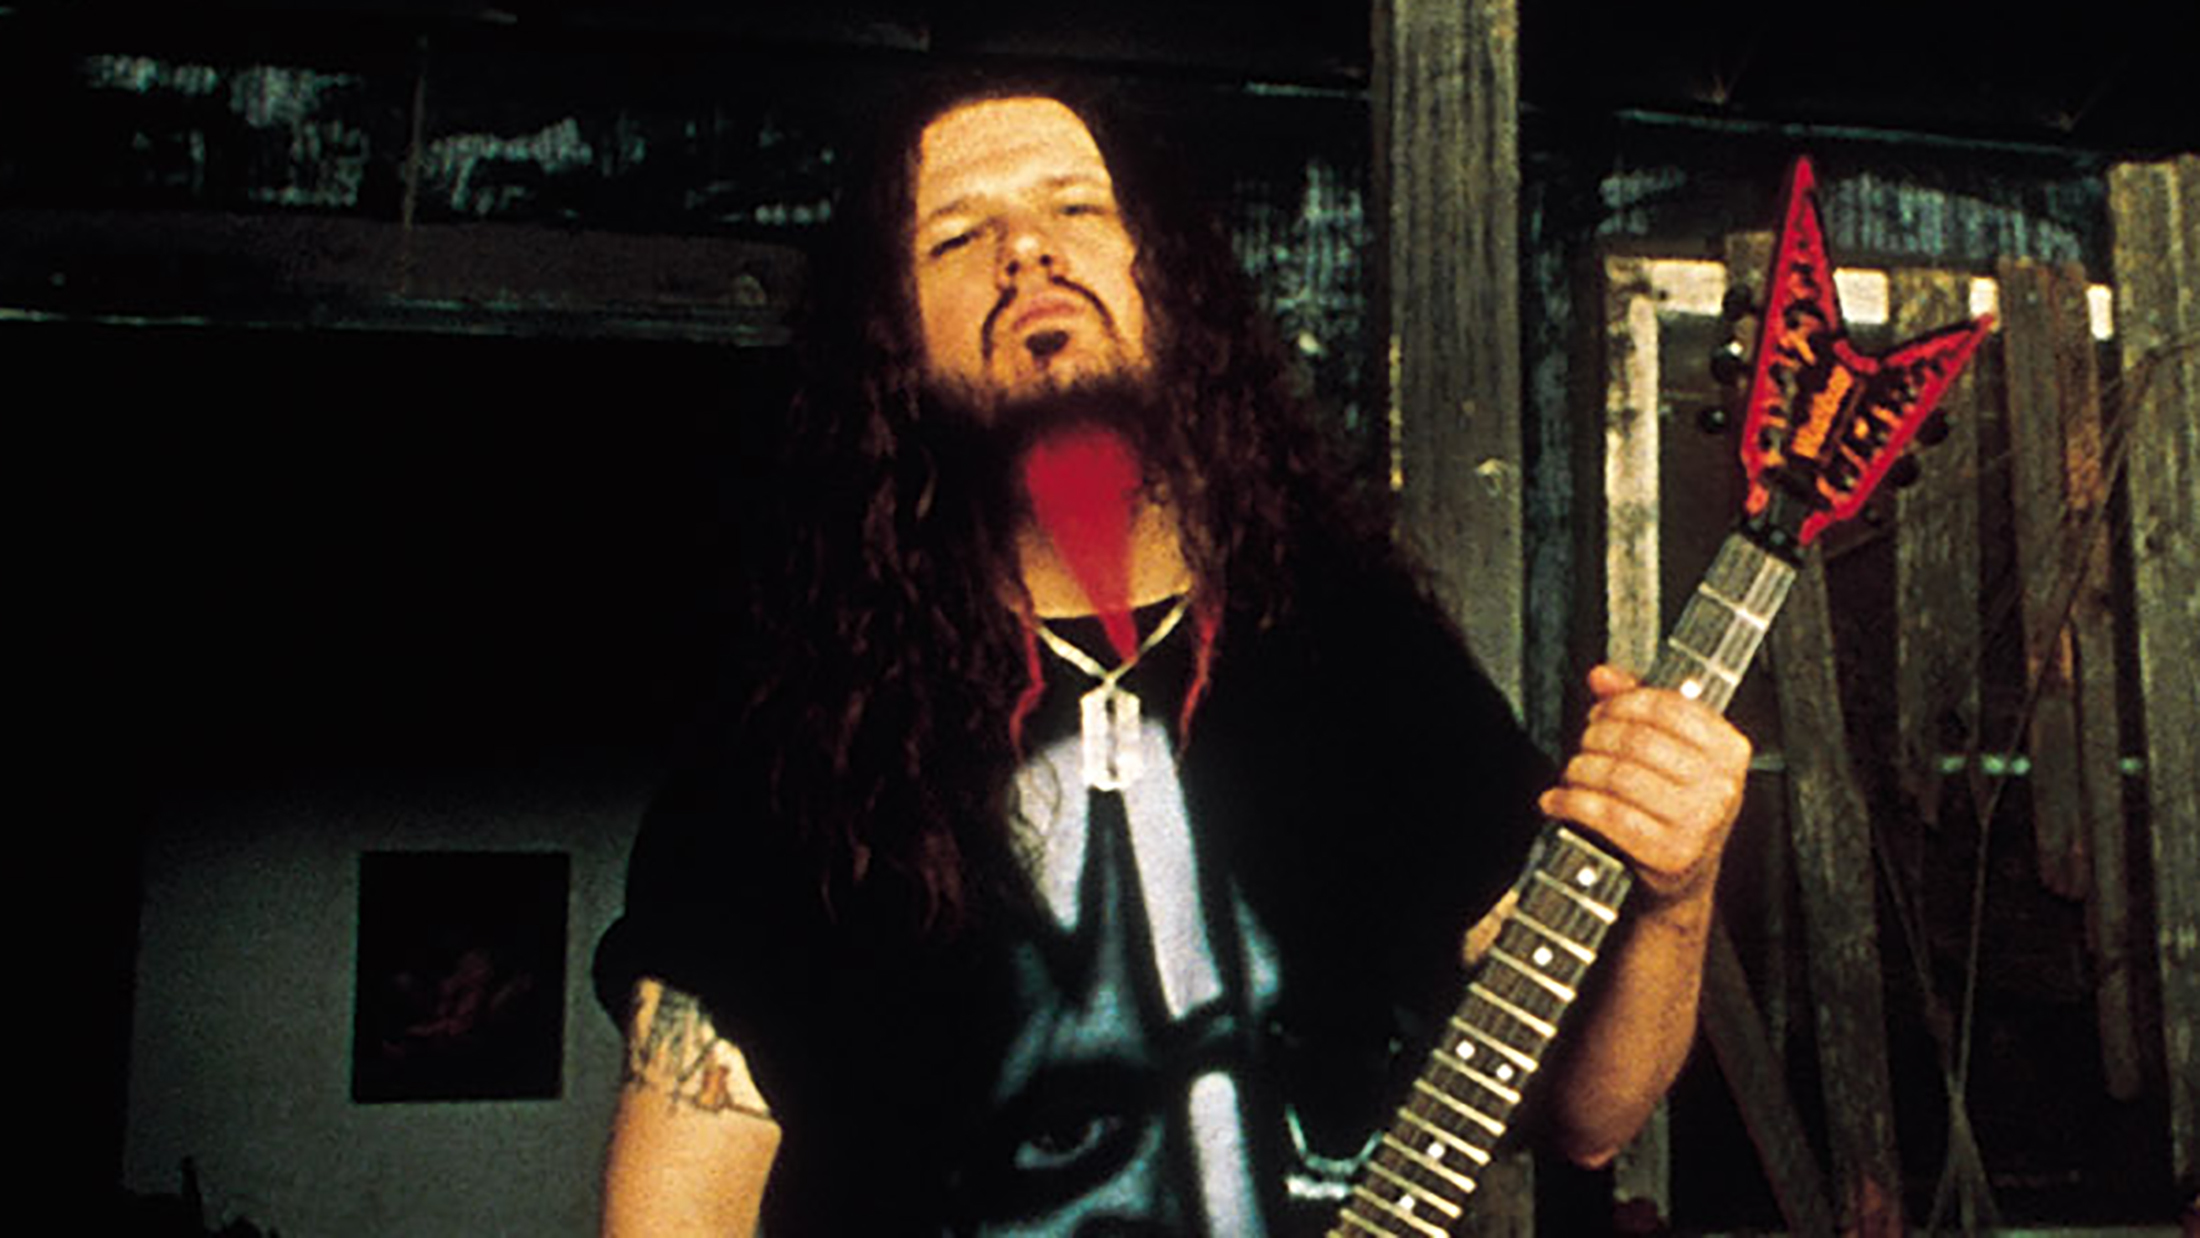 Dimebag Darrell - On this day 9 years ago my best friend in this world was  taken from me!!! I hope all of you remember and honor my brother on this  day !!